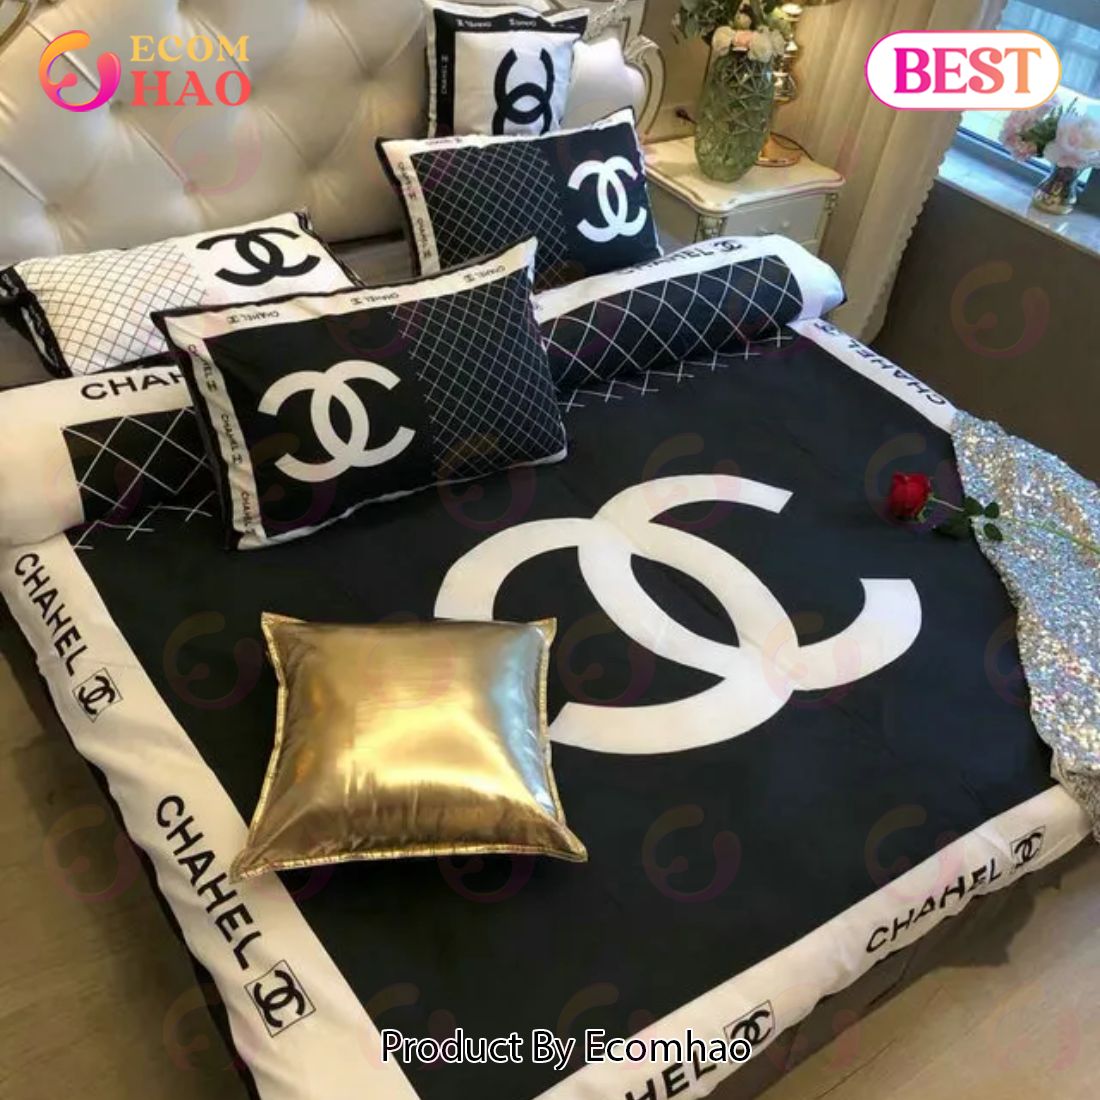 Chanel Luxury Brand Ver 07 Bedding Sets Sheets Duvet Bedspread Blankets Bedclothes Bed Linen Bedroom Ideas Covers Home Decor